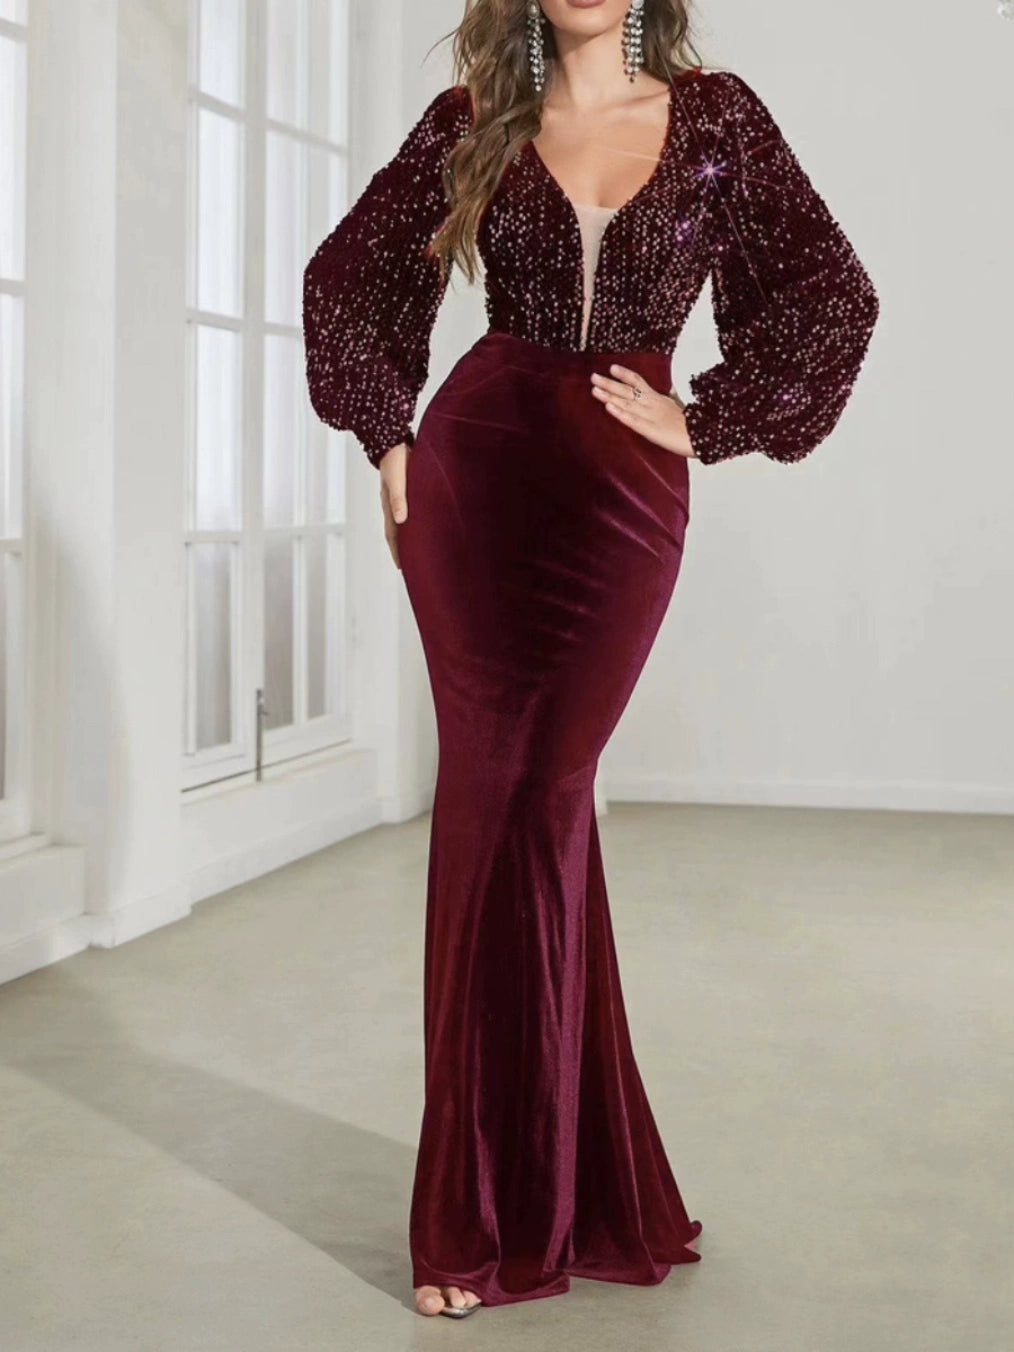 Sequin Elegance: Luxurious Banquet Dress for Glamorous Occasions